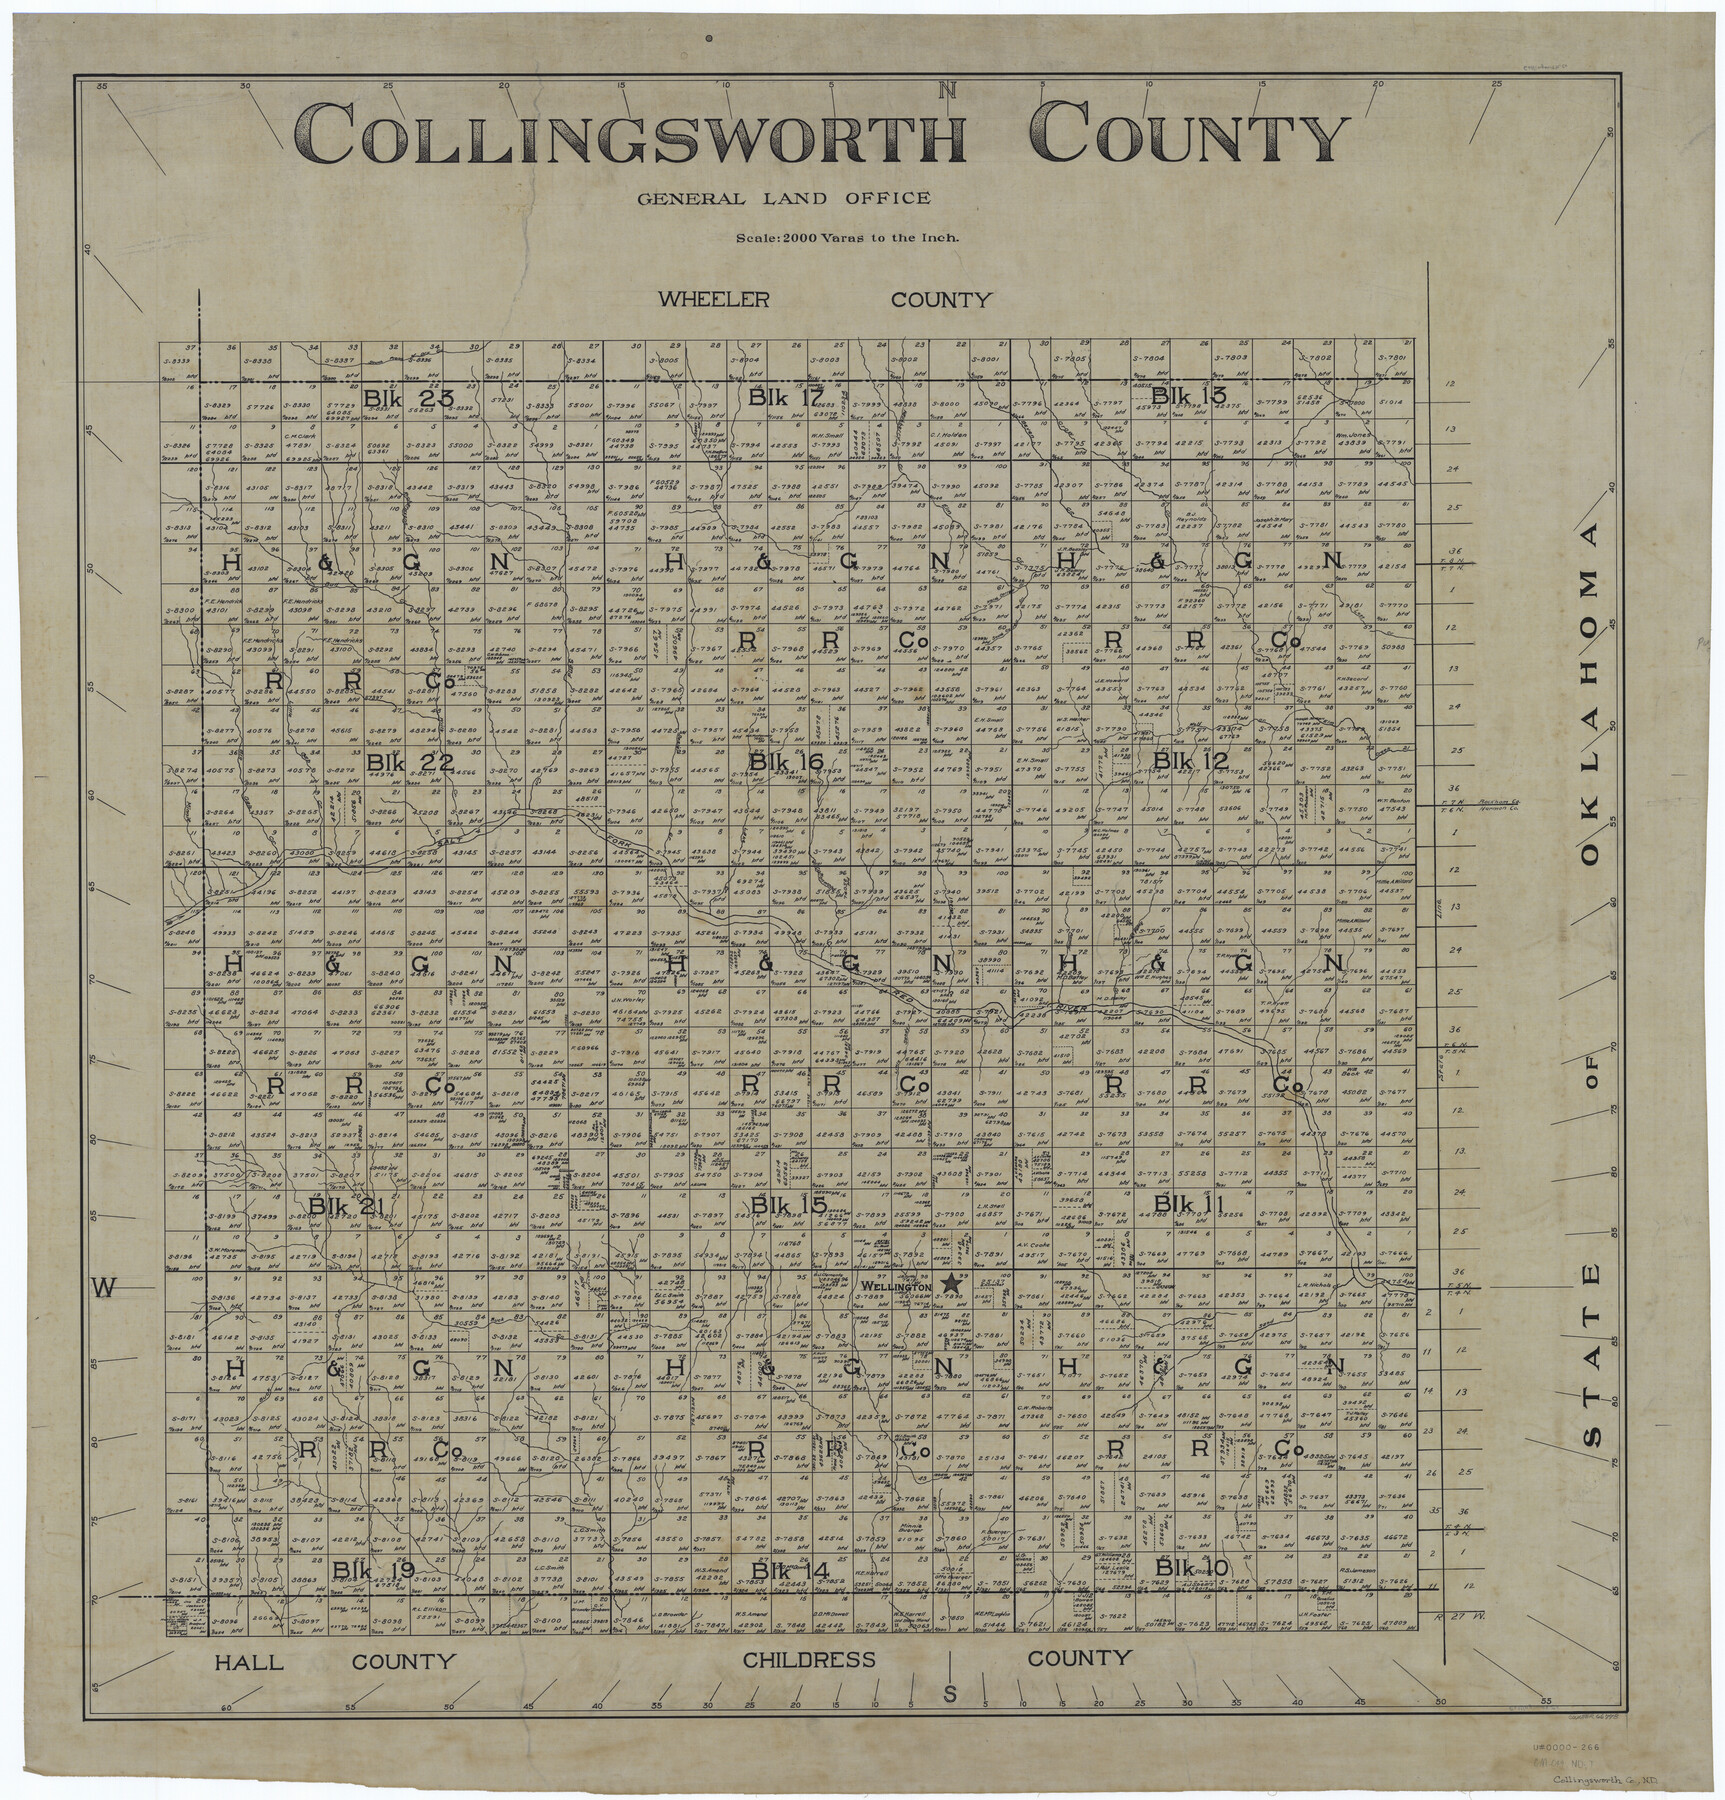 66778, Collingsworth County, General Map Collection